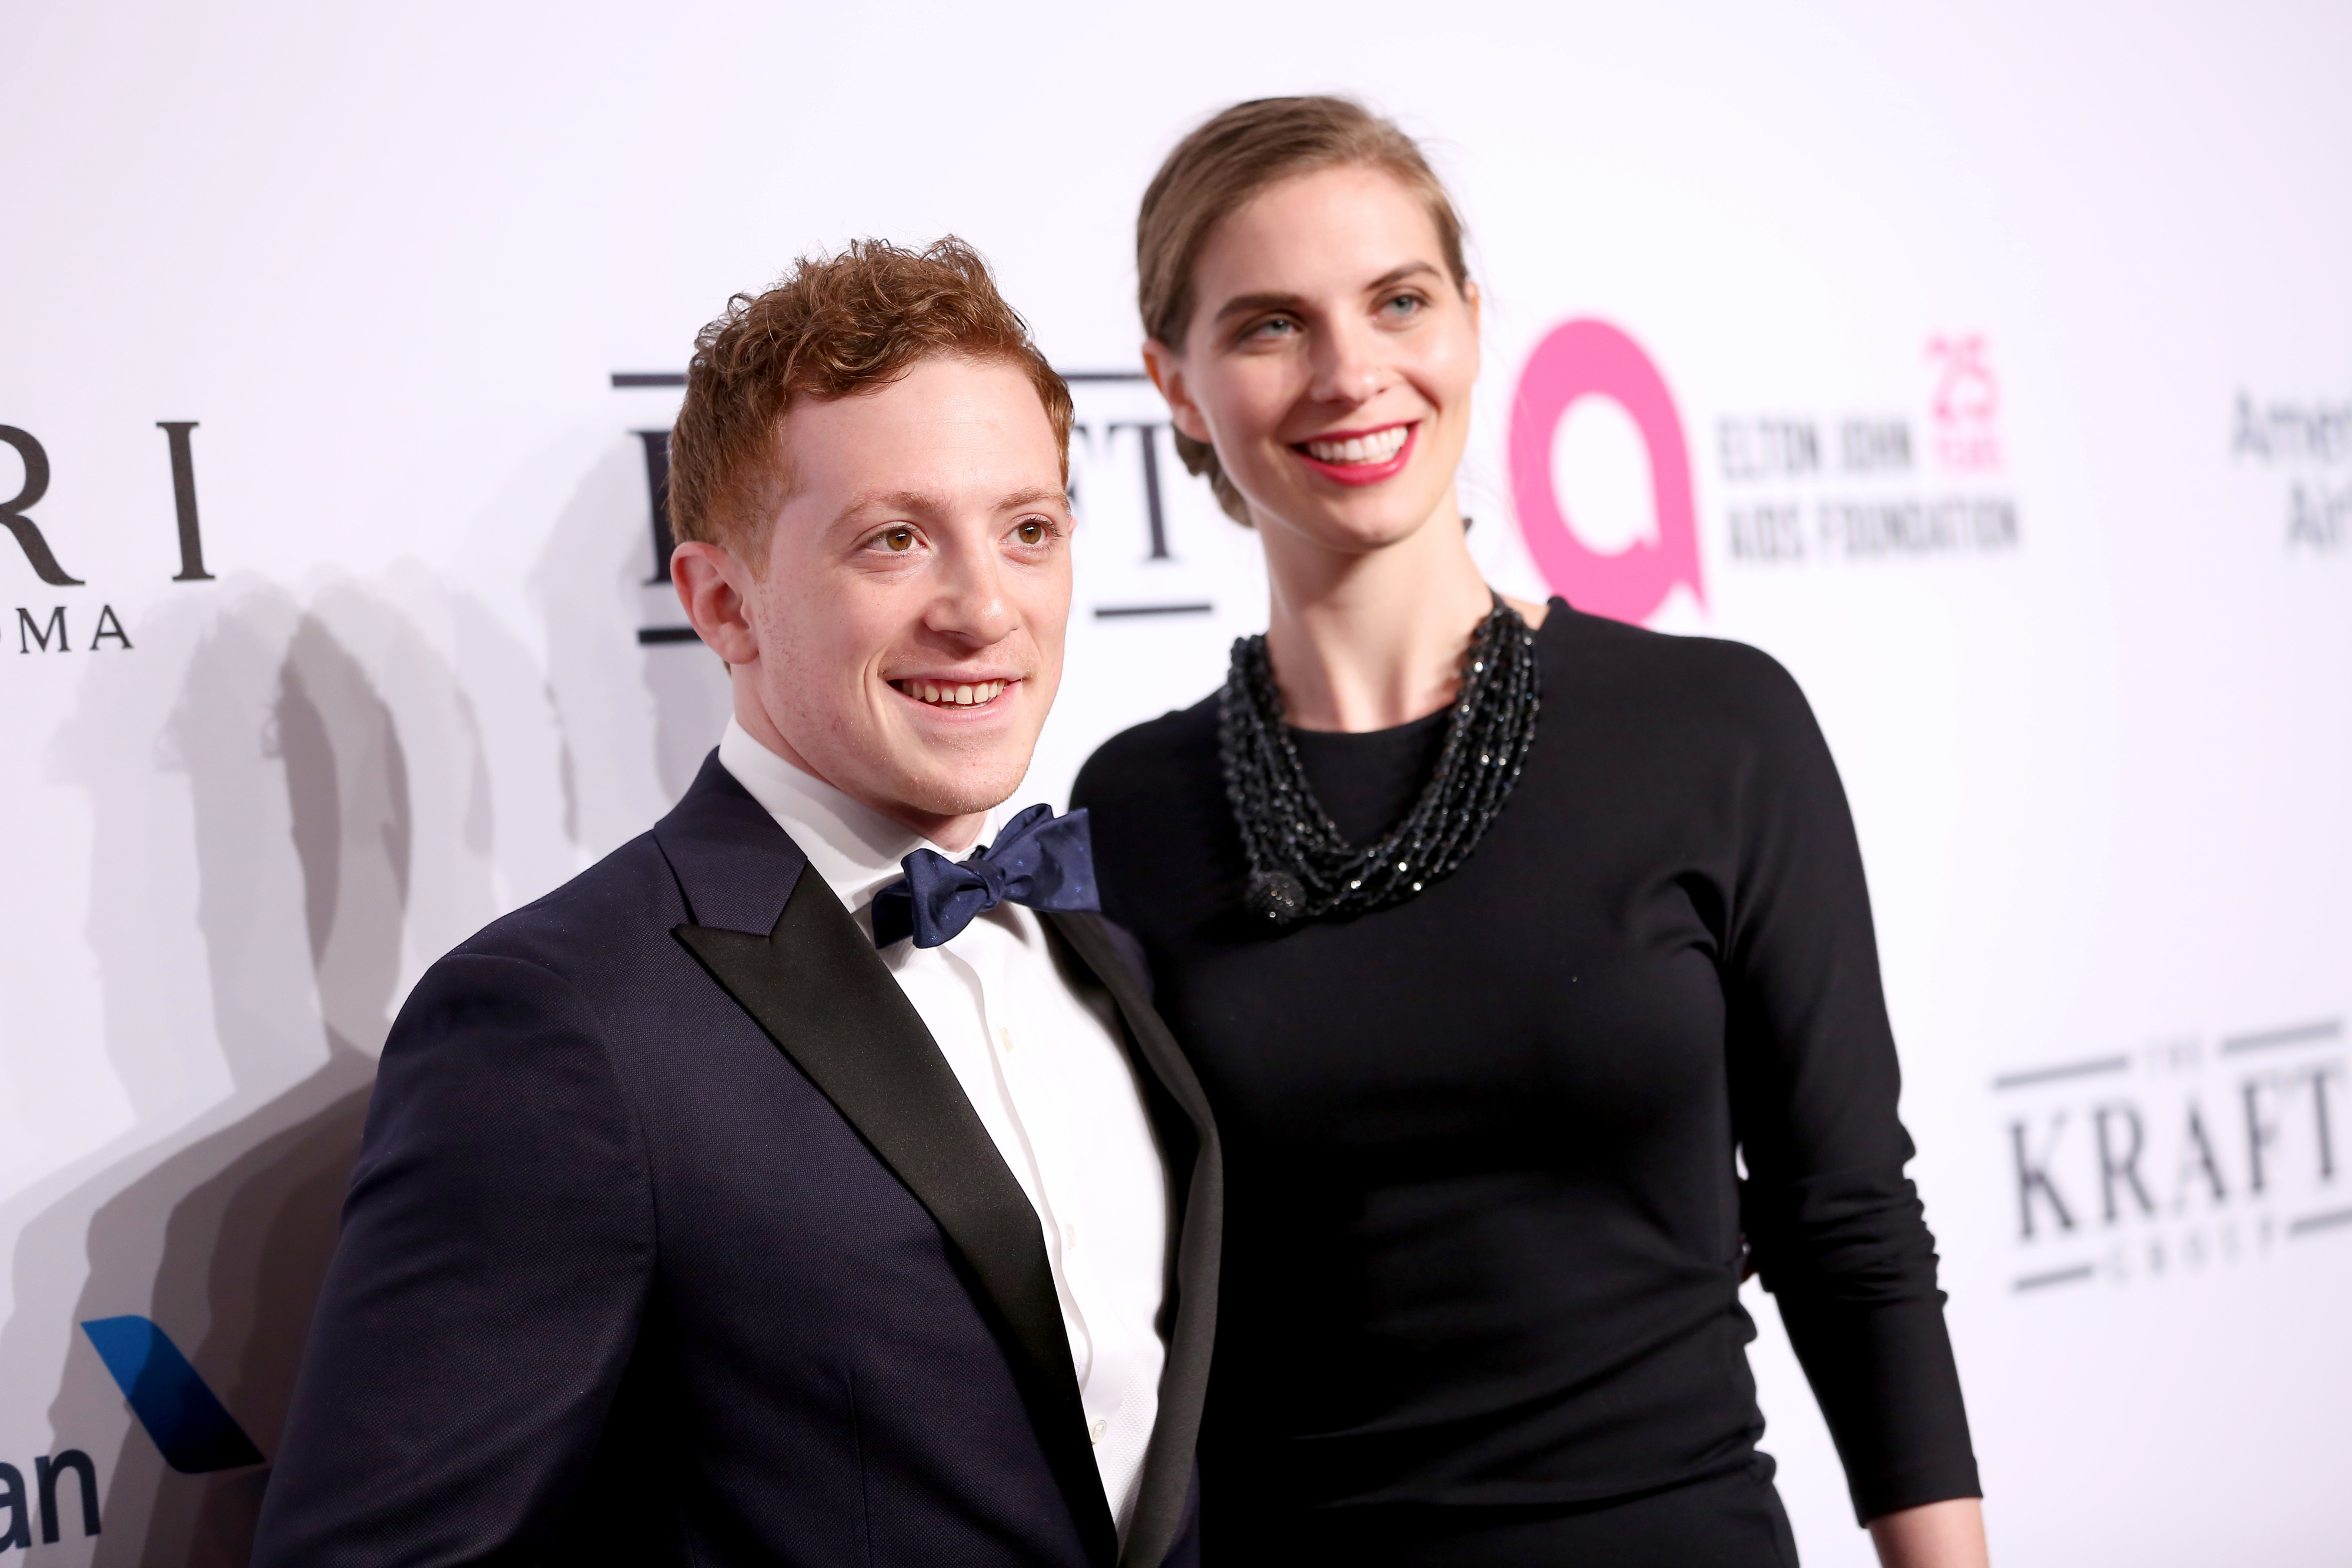 The estranged couple smile for photos on the red carpet